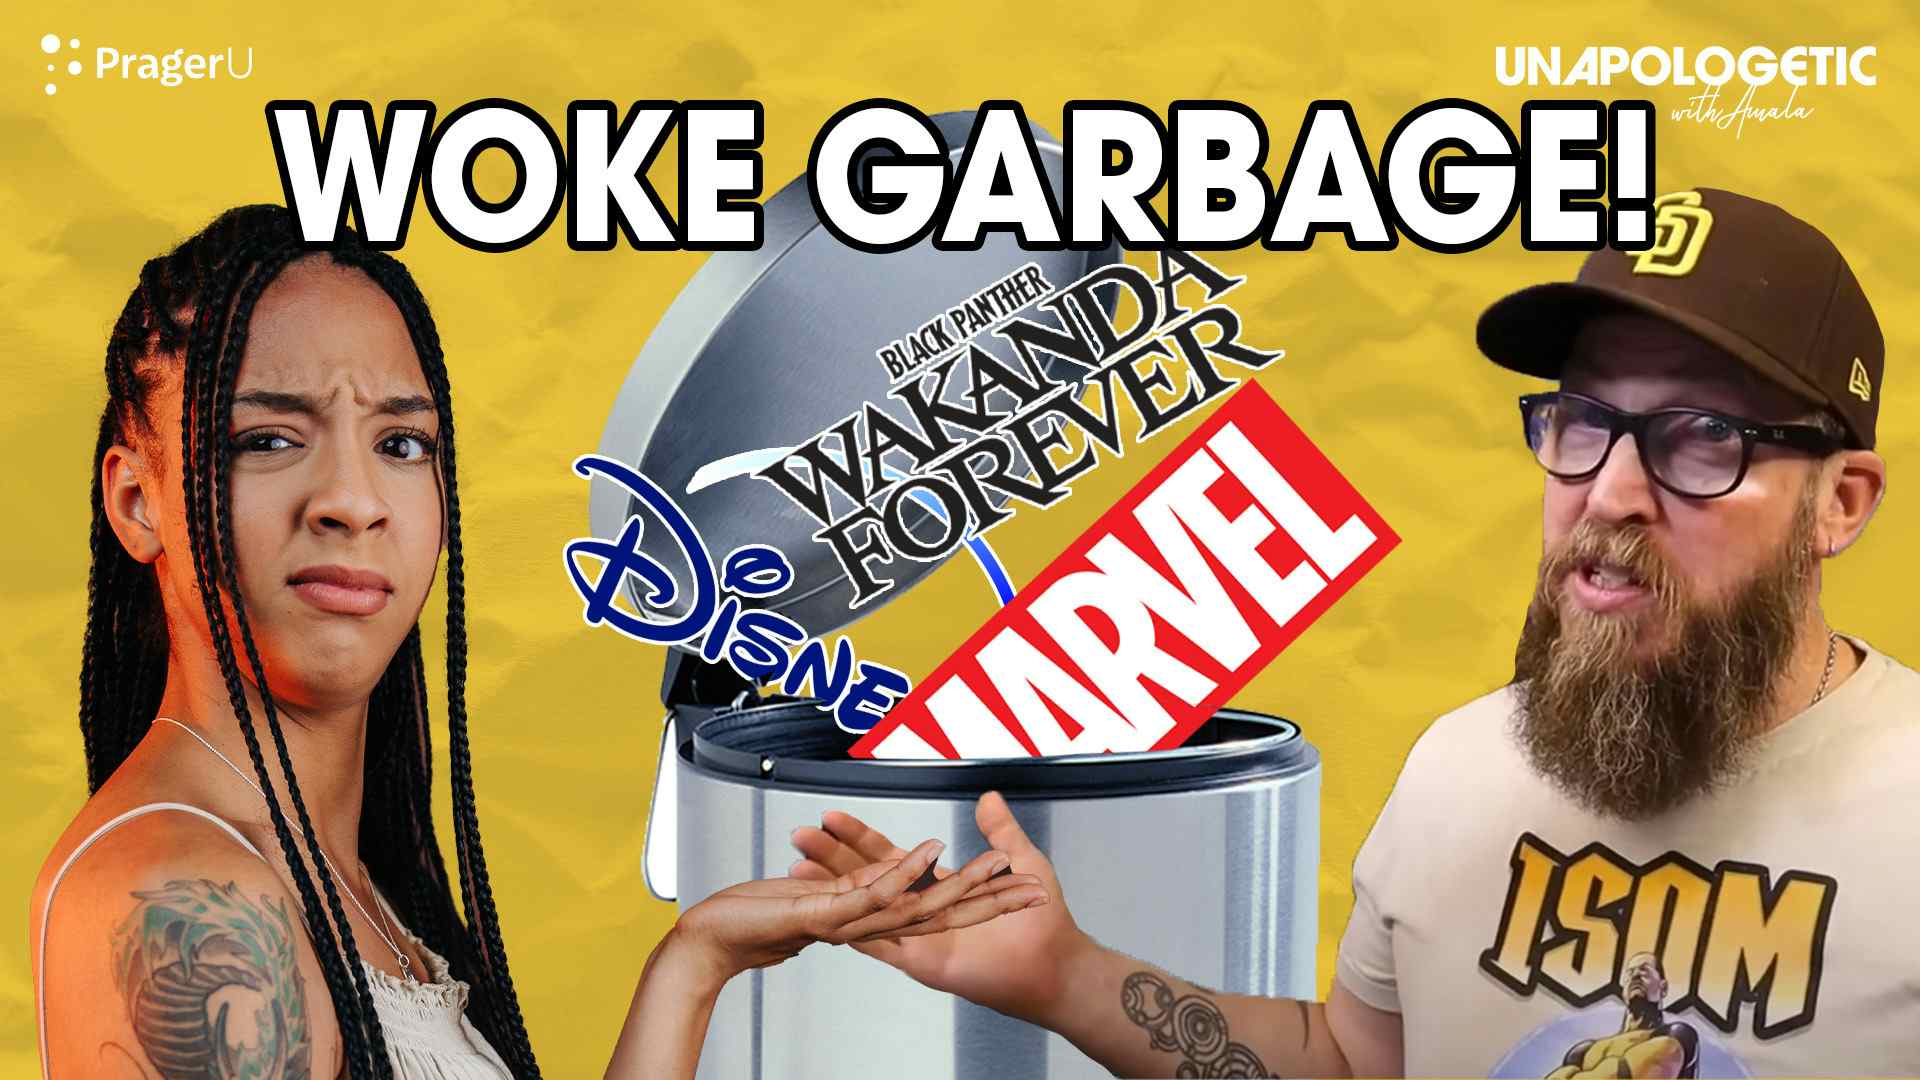 Marvel, Disney & Hollywood Are Dead and Wokeness Killed Them with Guest Nerdrotic